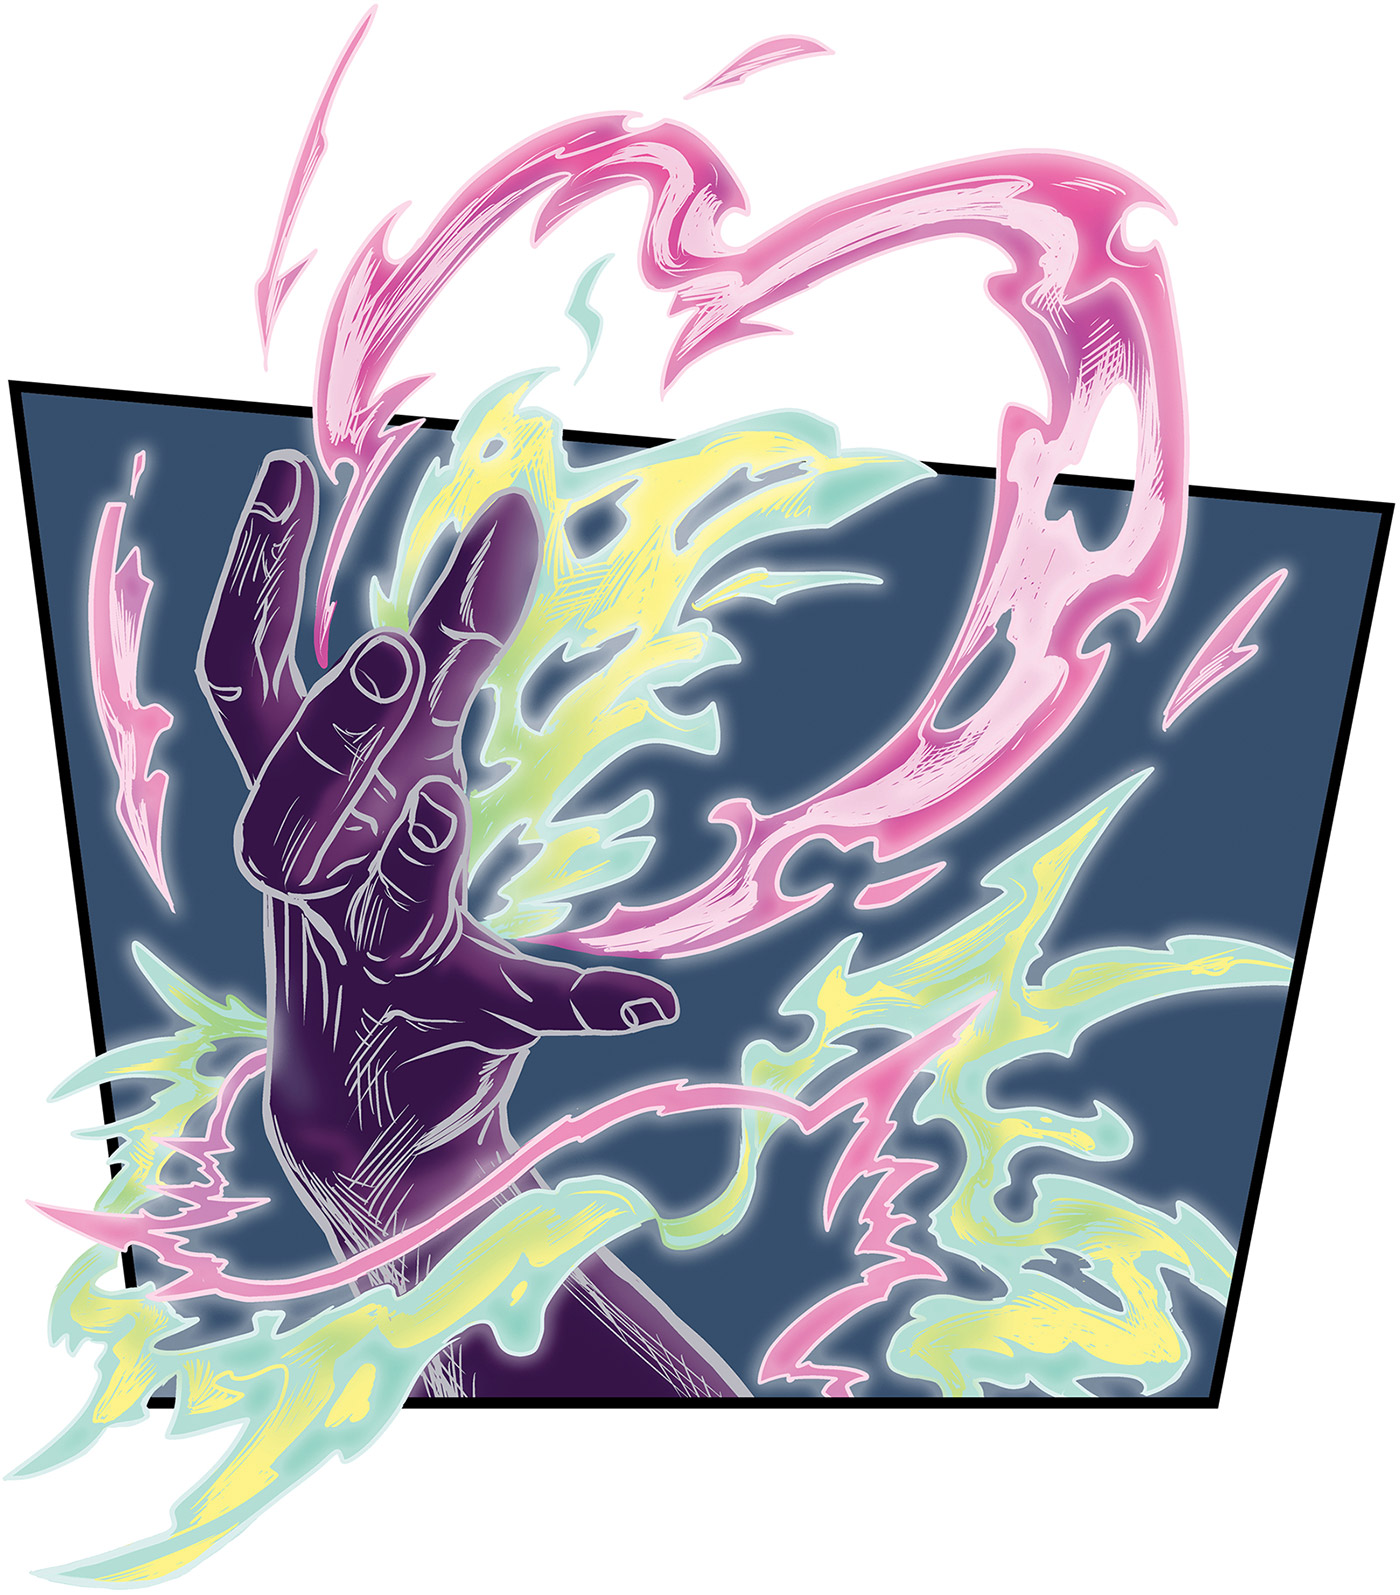 Graphic novel style drawing of a hand that appears to be directing lightning or magic to swirl the hand and forearm